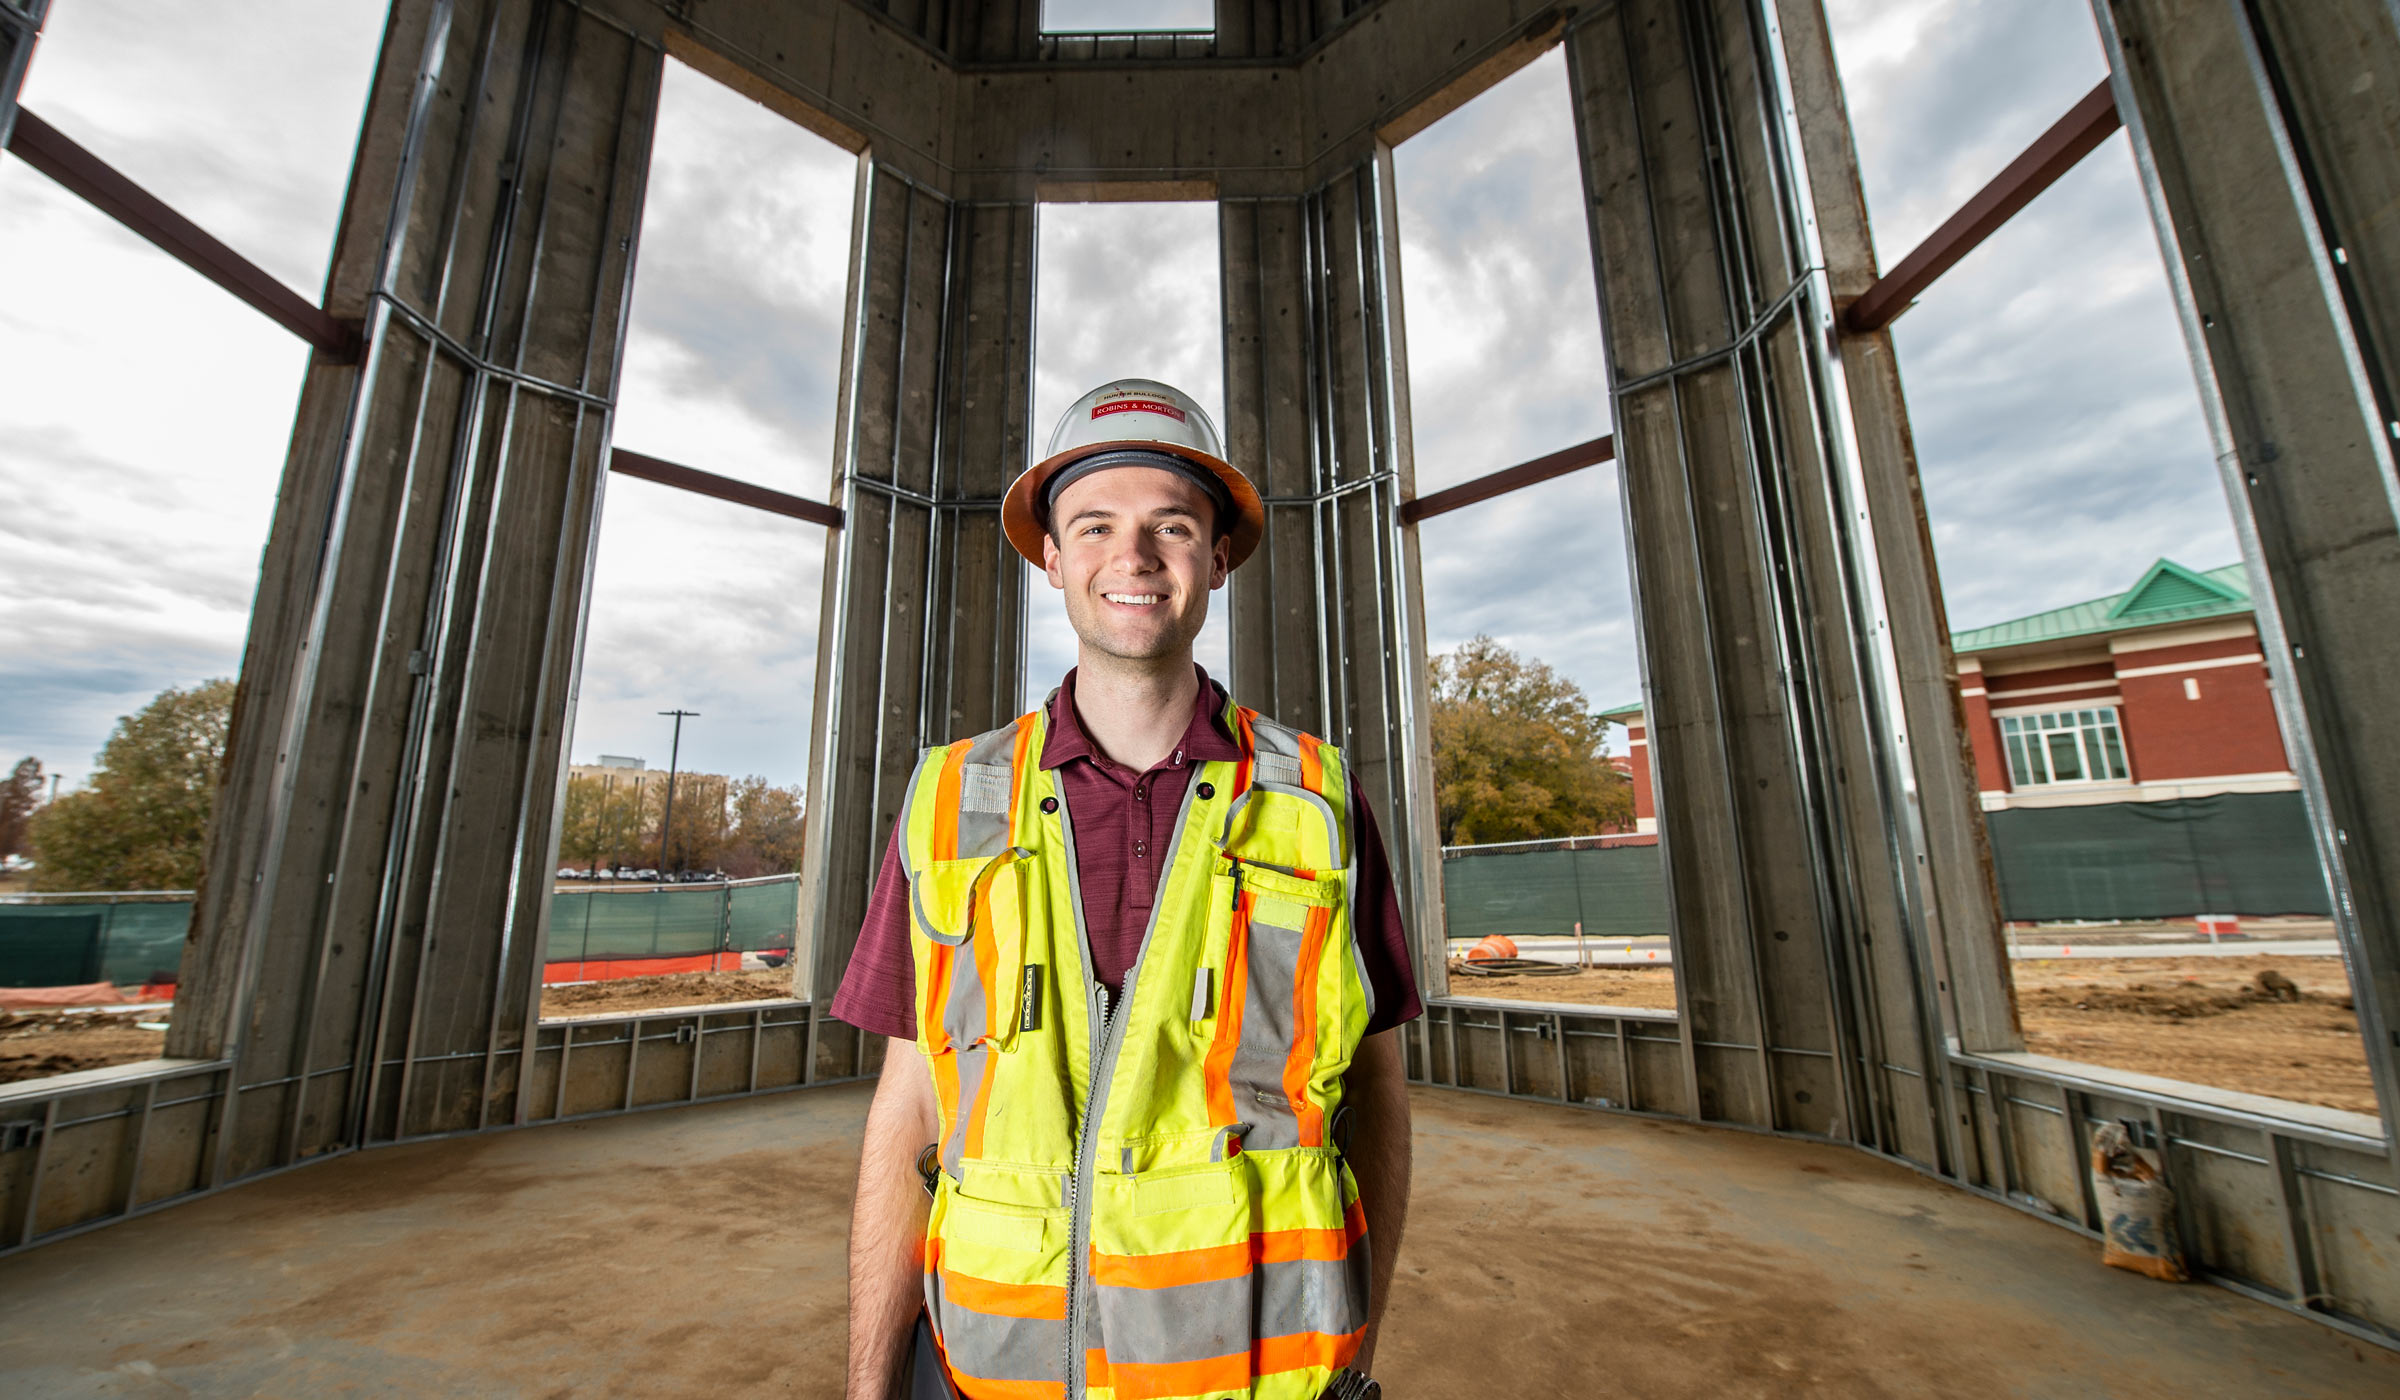 Hunter Bullock, pictured at a construction site.